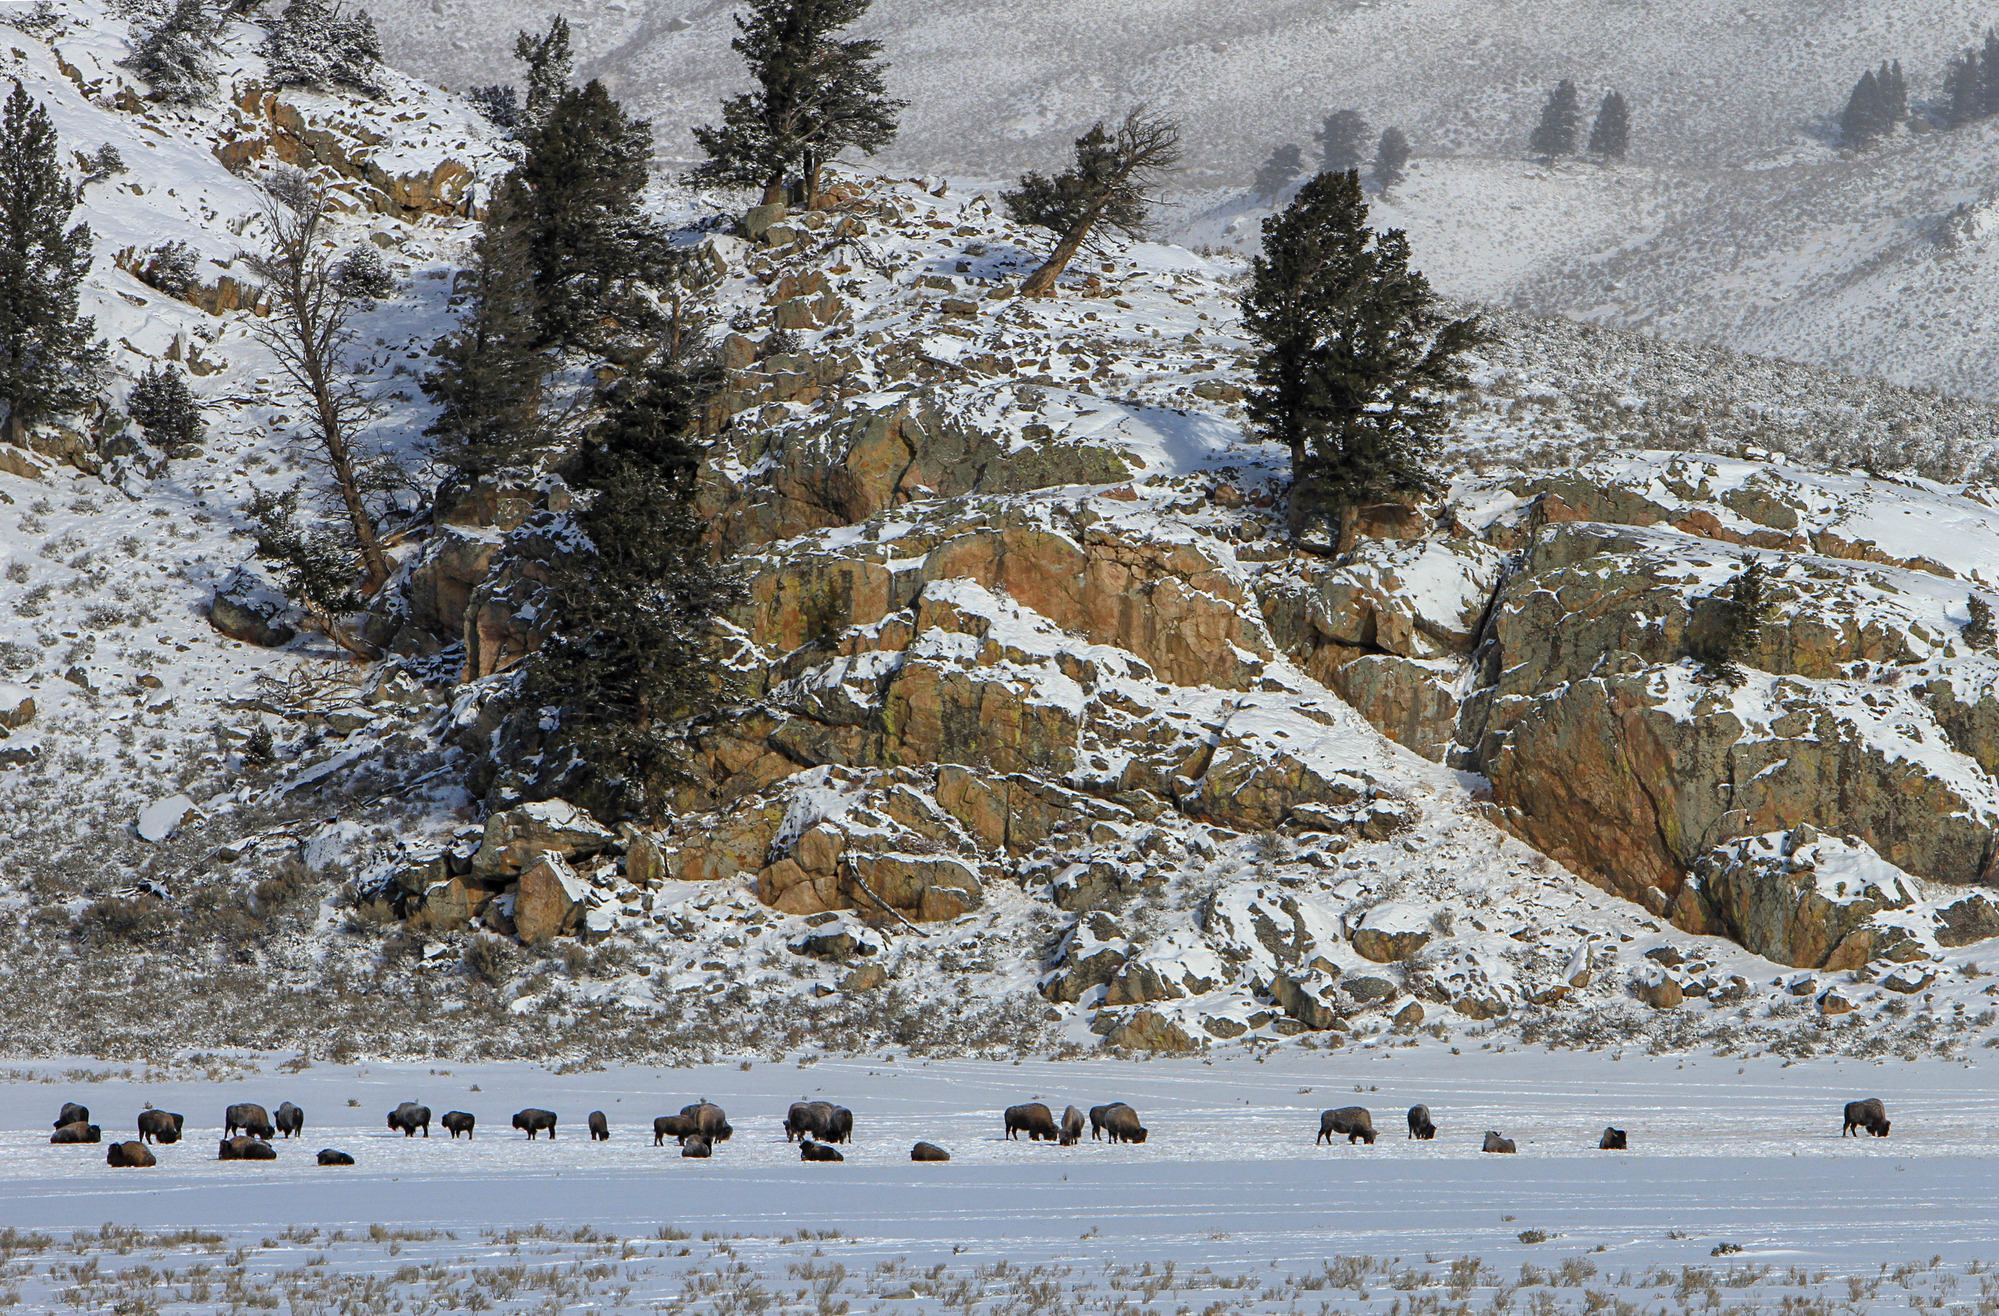 The herd is grazing in snow along a cliff.